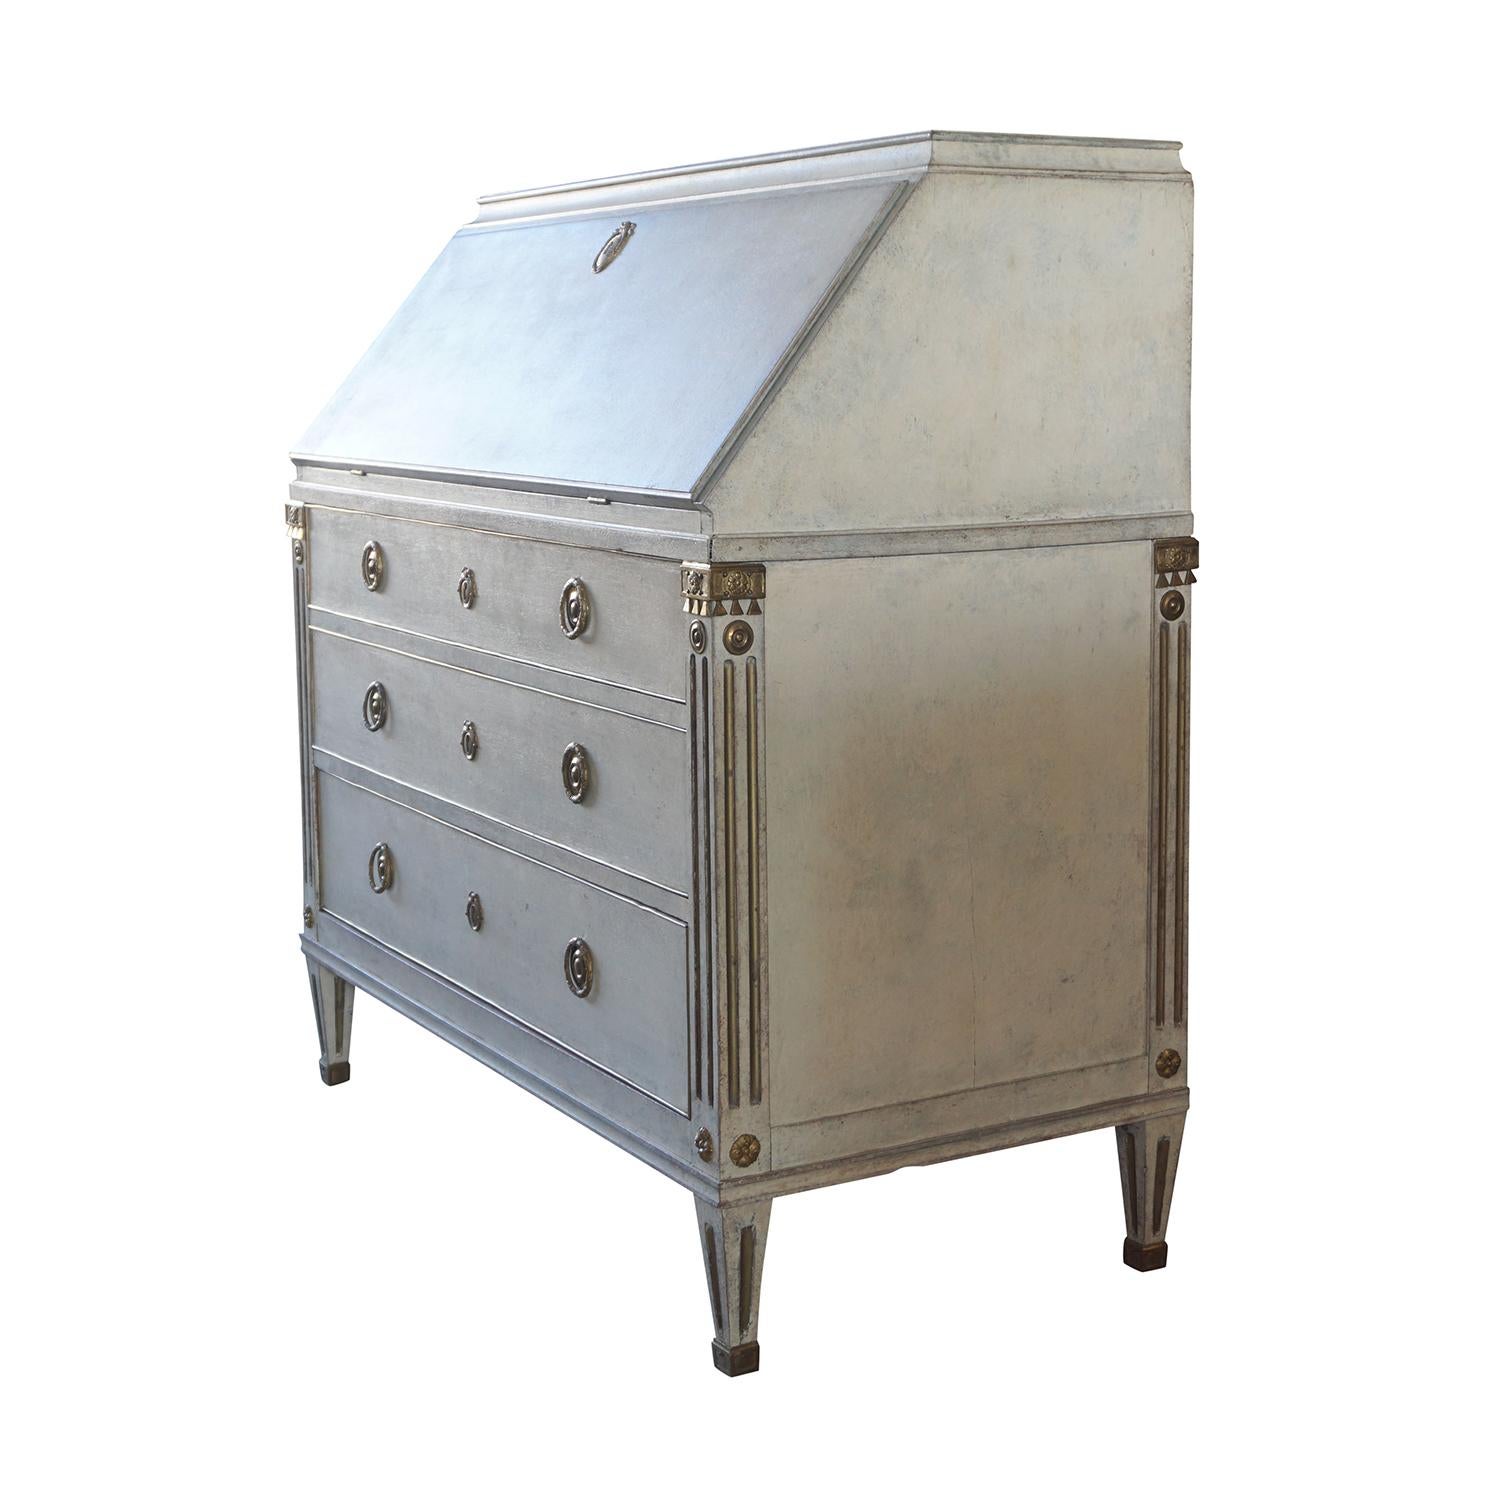 An antique Swedish Gustavian bureau, writing desk or table made of hand carved pinewood and bronze, enhanced by detailed brass decor inlay, in good condition. The light-grey Scandinavian fold out desk is detailed in the neoclassical Greek style with